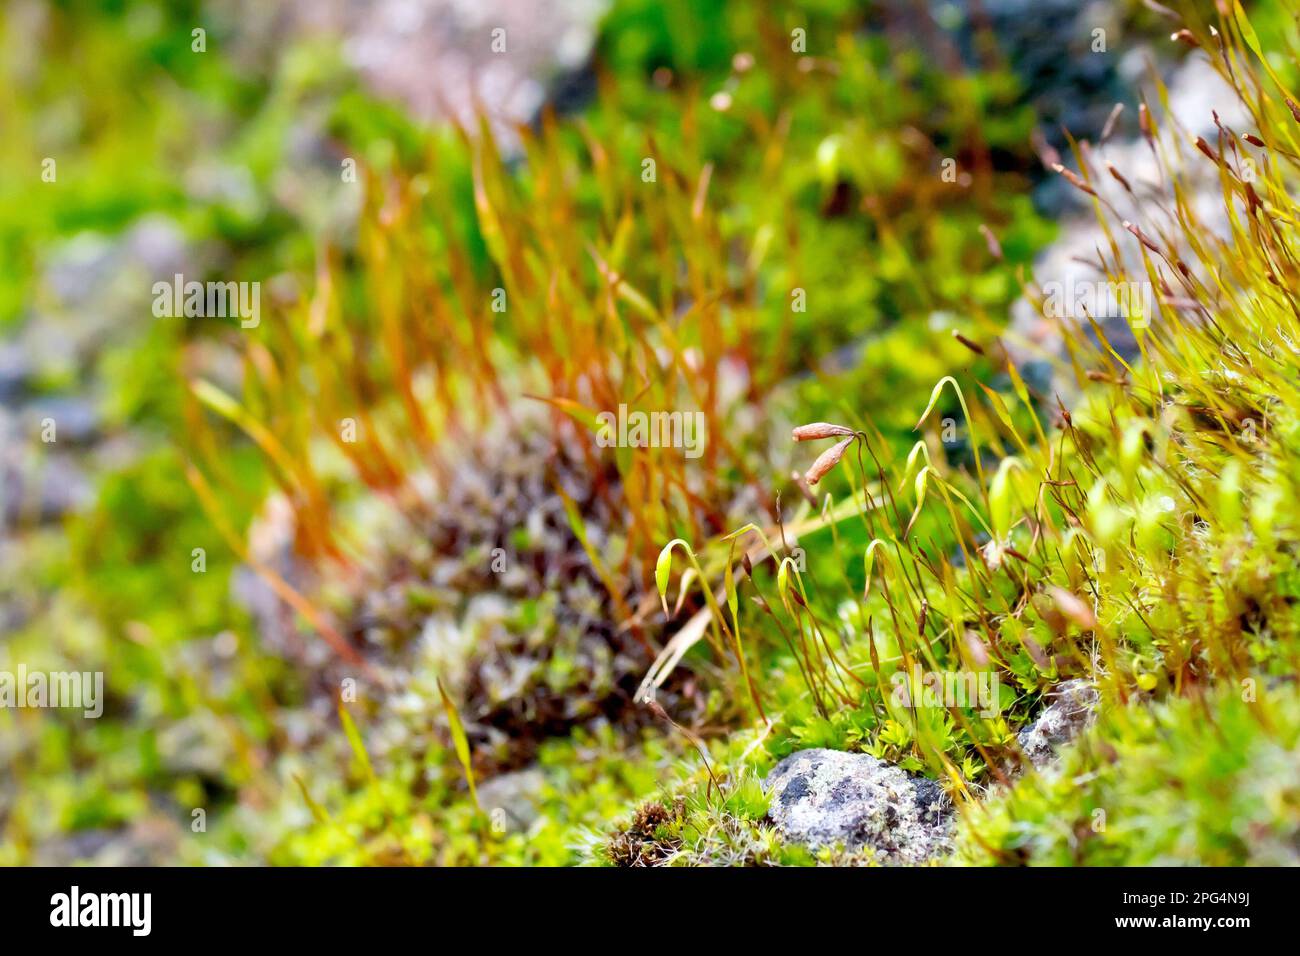 Close up focusing on the capsules of the moss in the foreground, possibly Wall Screw-moss (tortula muralis), growing on an old sandstone wall. Stock Photo